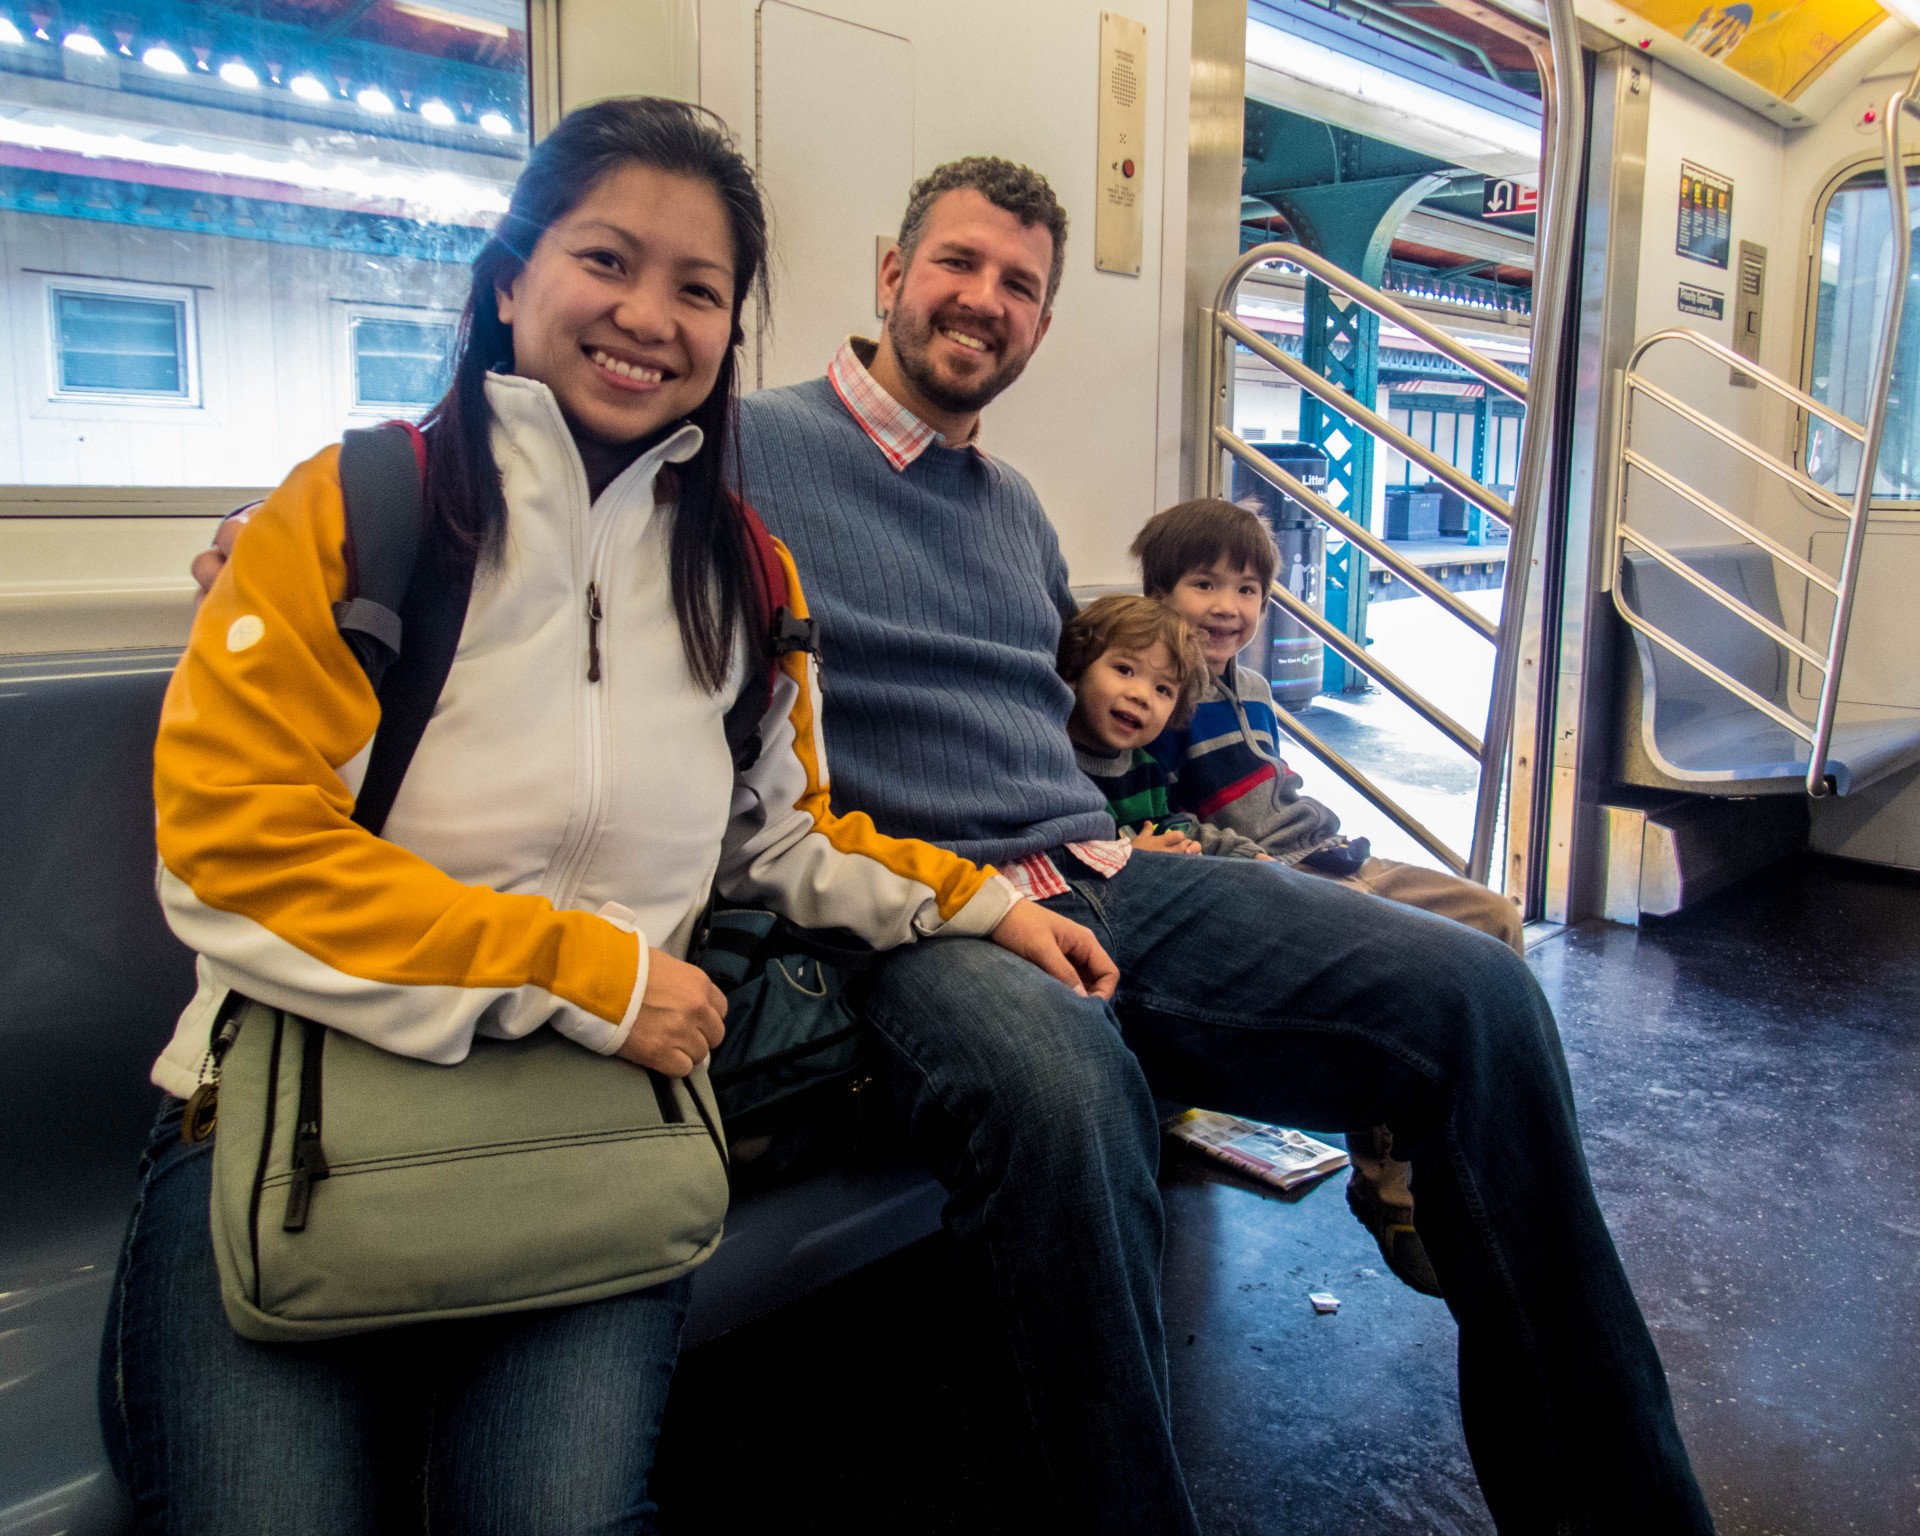 family smiling on a subway - New York